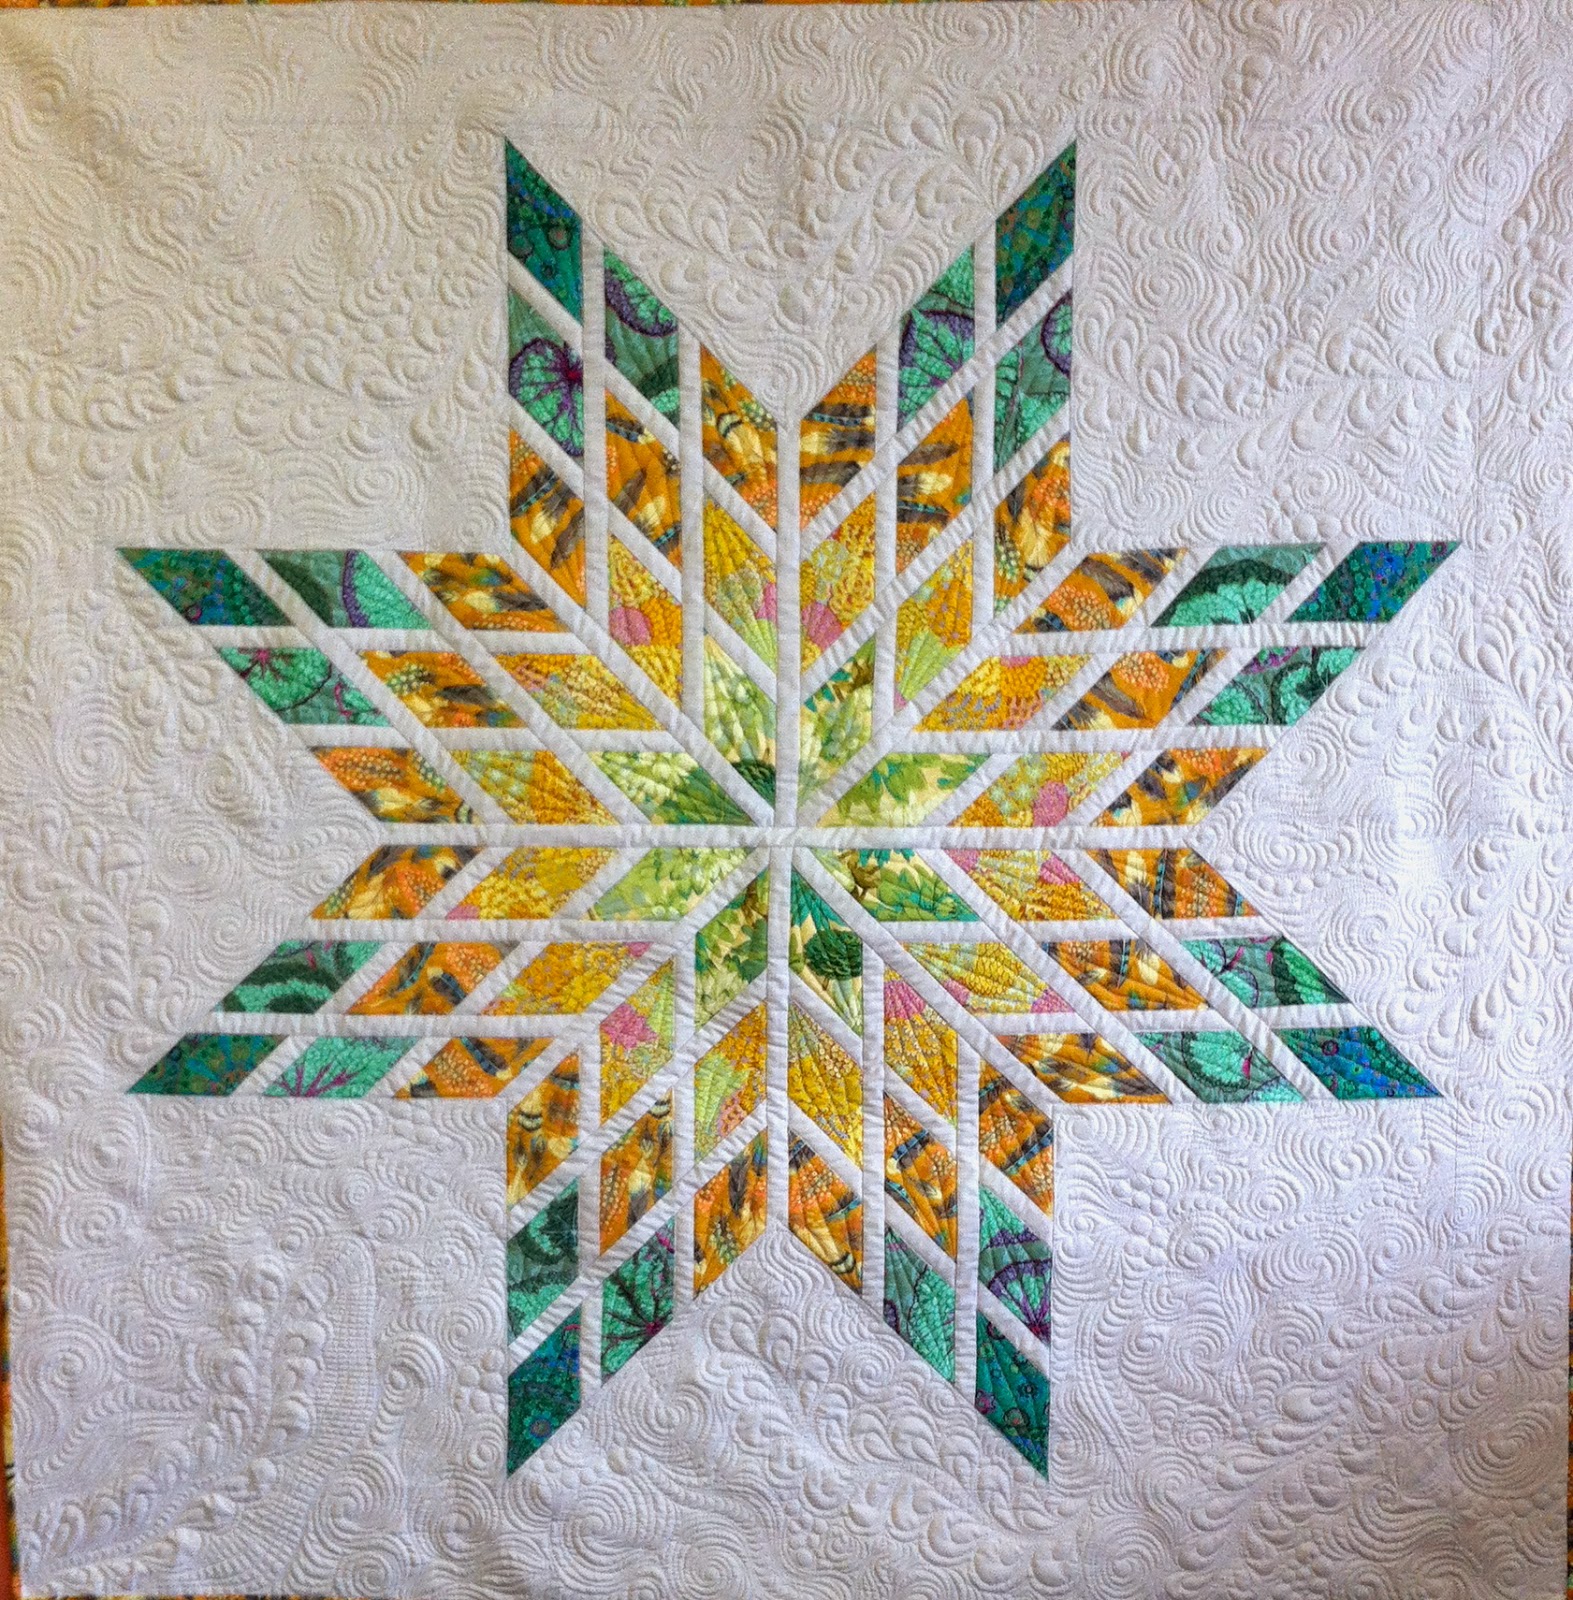 Linda's Quiltmania: A Lone Star Quilt with Attitude!